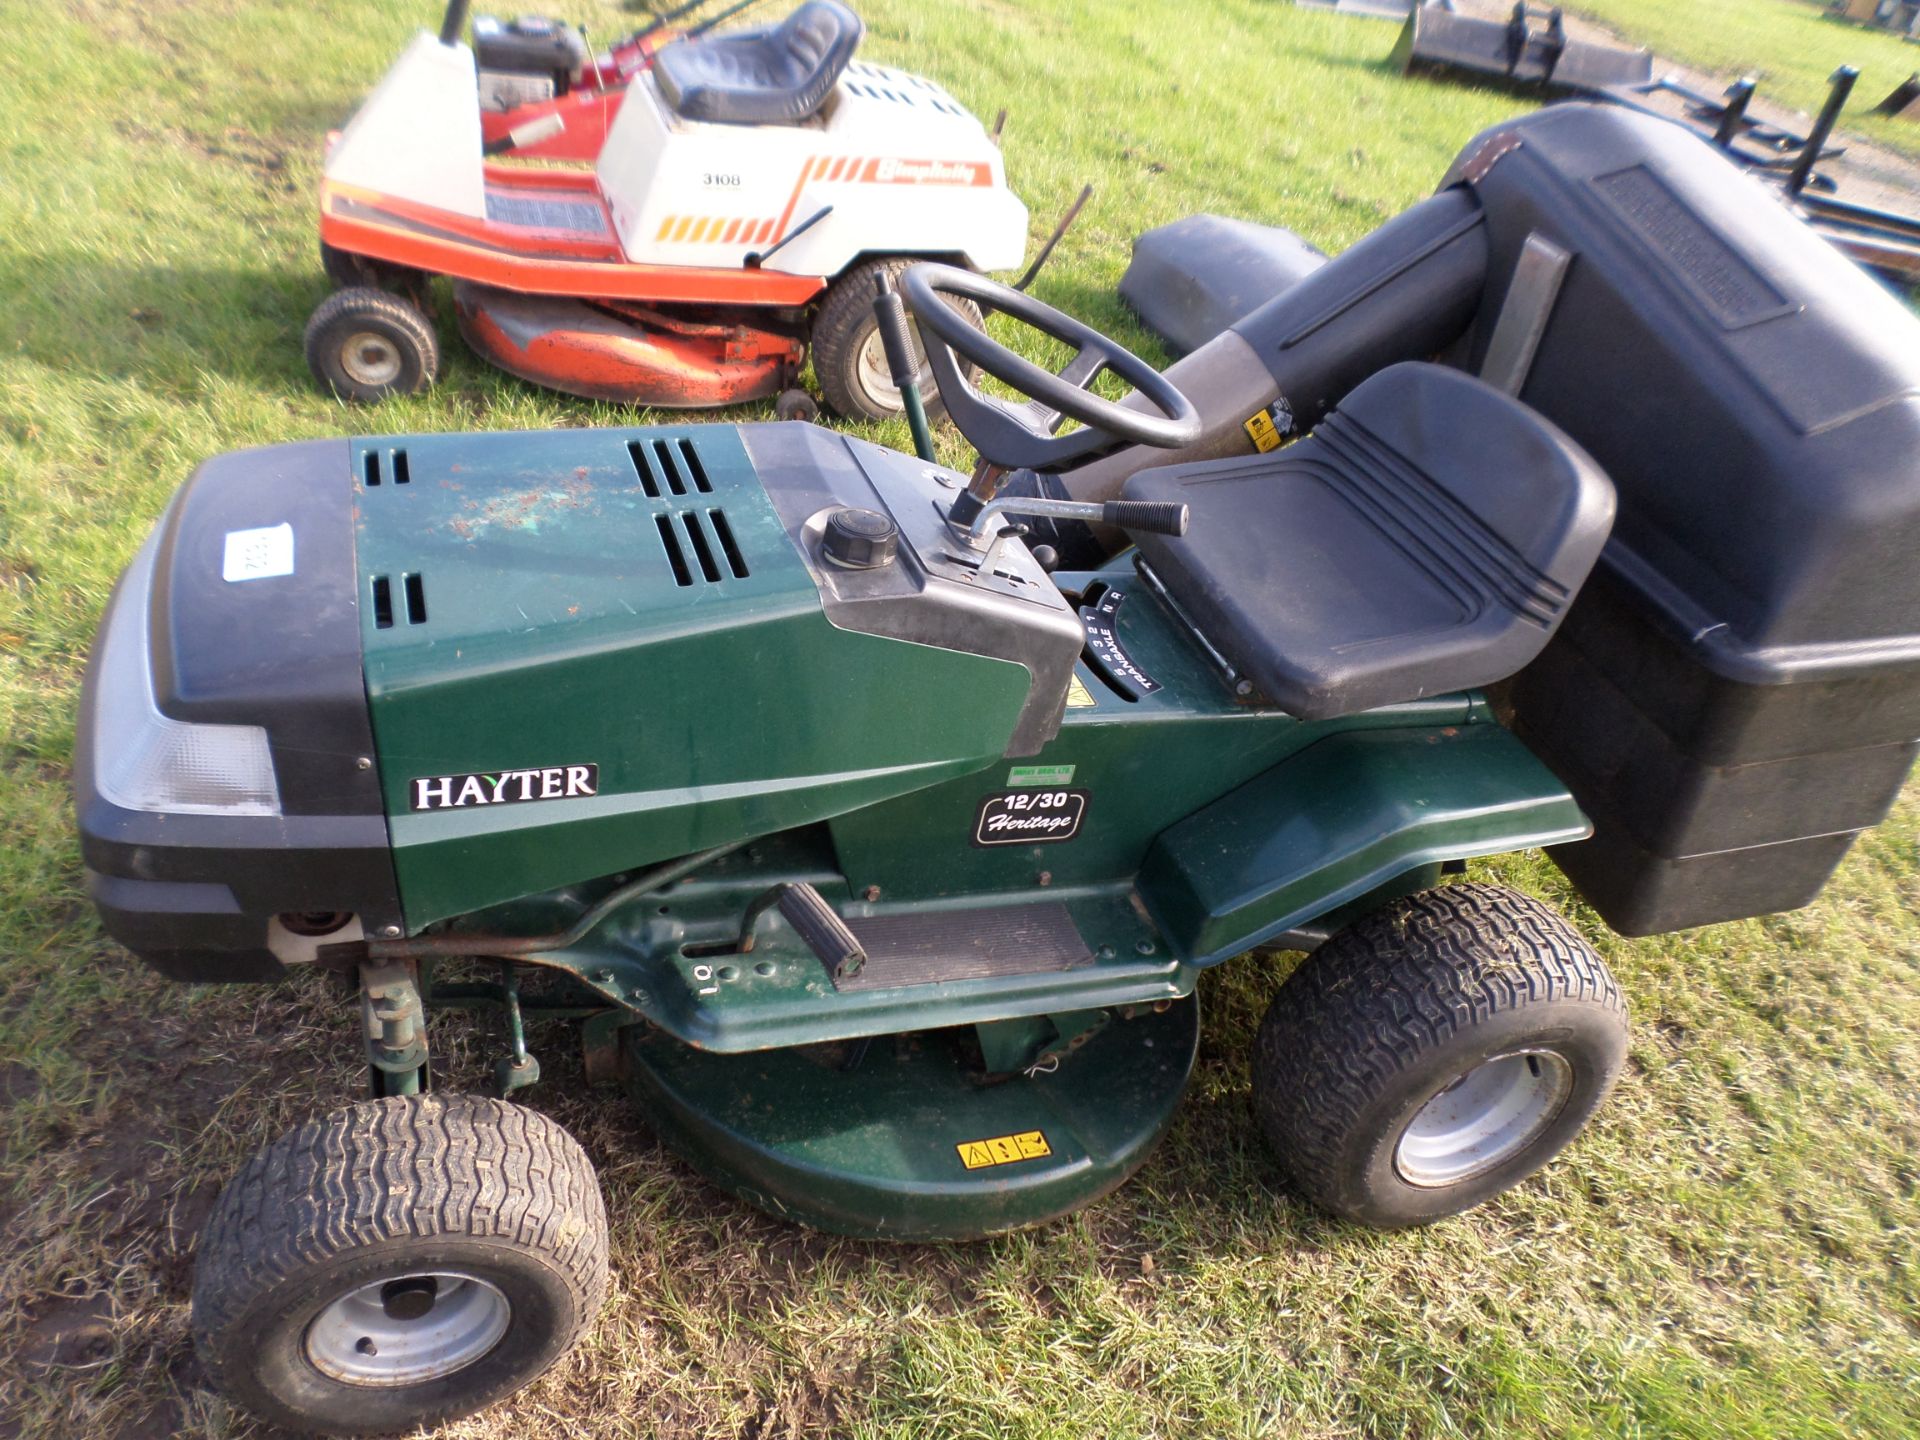 Hayter Heritage 12/30 ride on mower with grass collector, used this season but not serviced